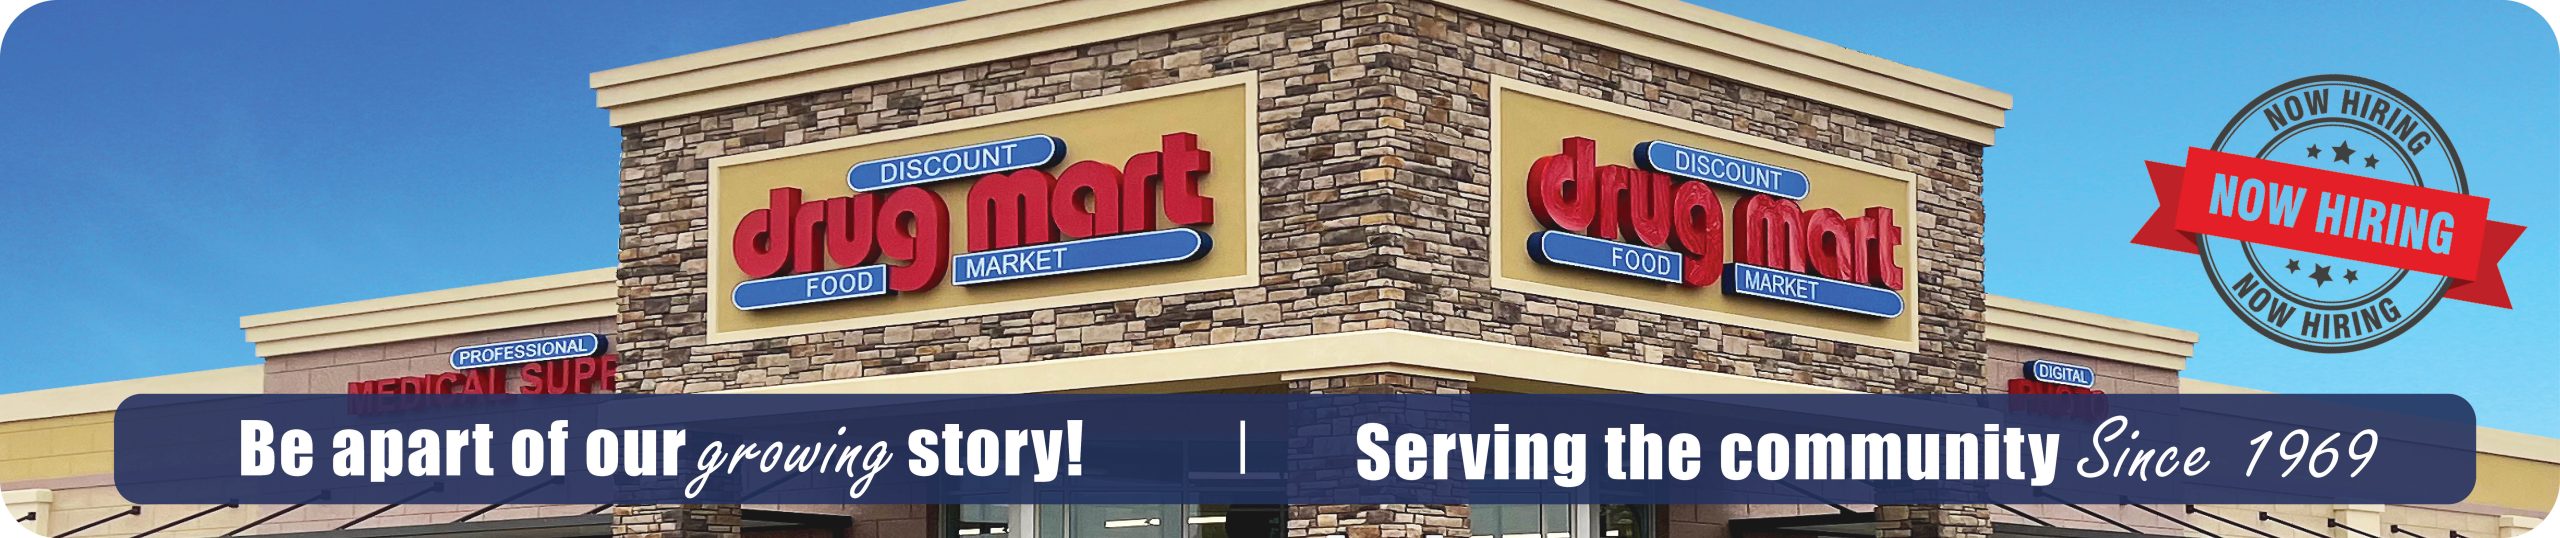 Discount Drug Mart store image. Be apart of our growing story! Serving the community since 1969